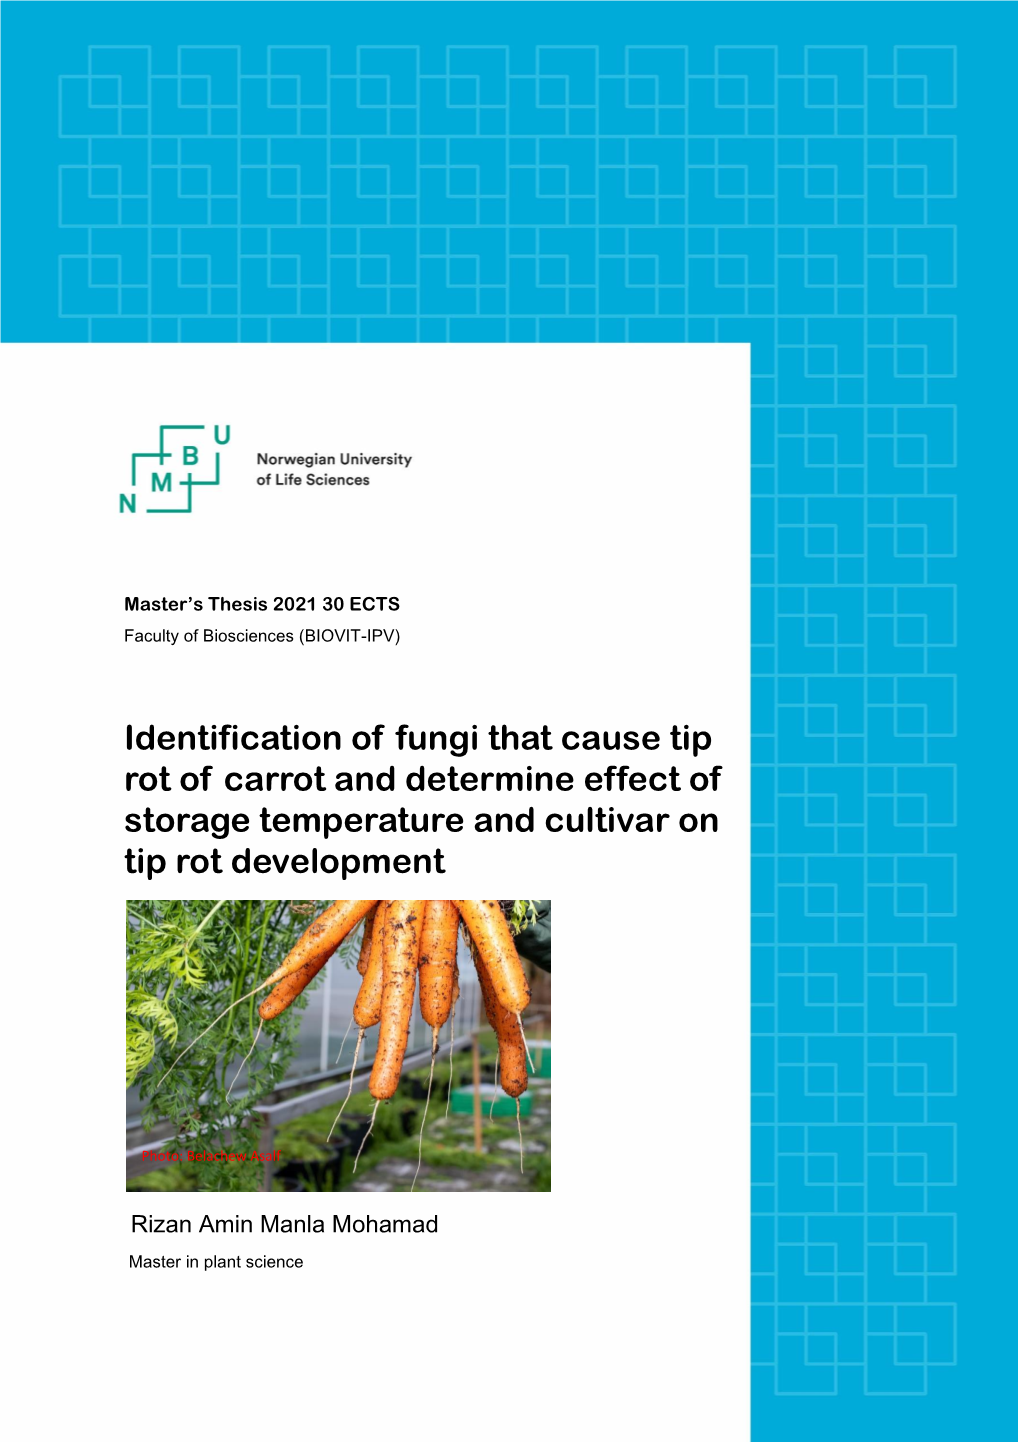 Identification of Fungi That Cause Tip Rot of Carrot and Determine Effect of Storage Temperature and Cultivar on Tip Rot Development